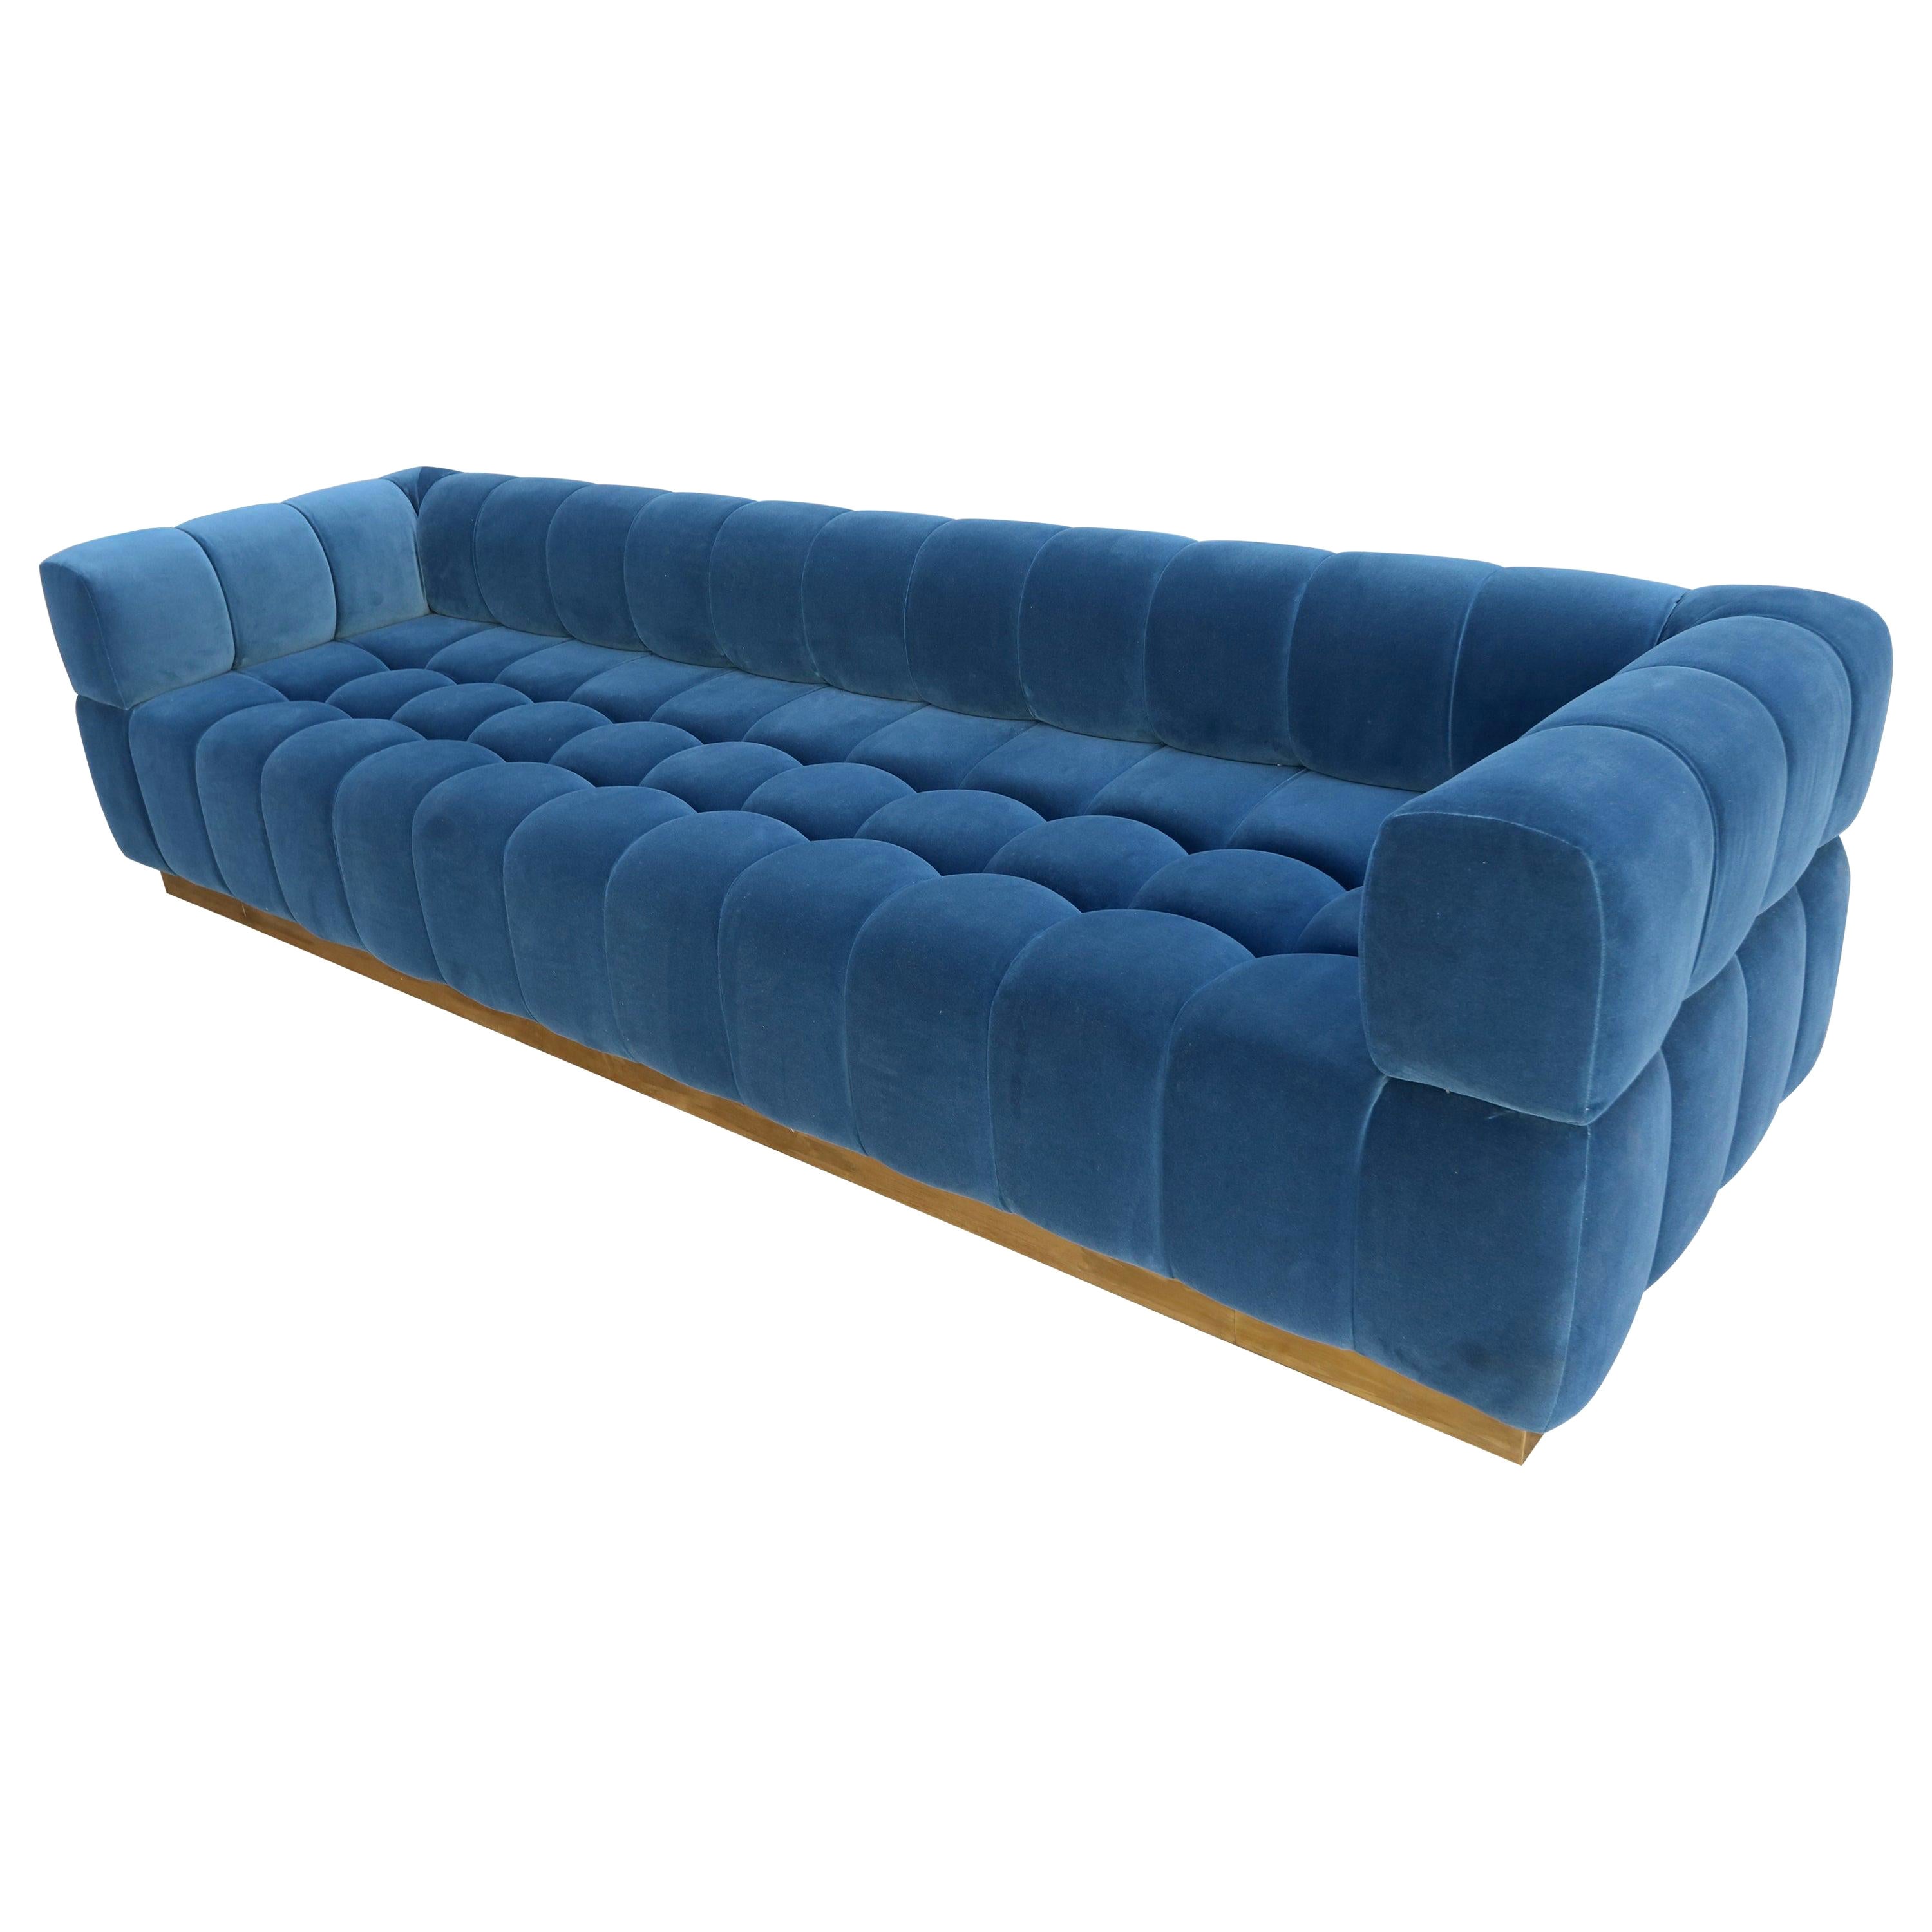 Custom Tufted Blue Velvet Sofa with Brass Base by Adesso Imports